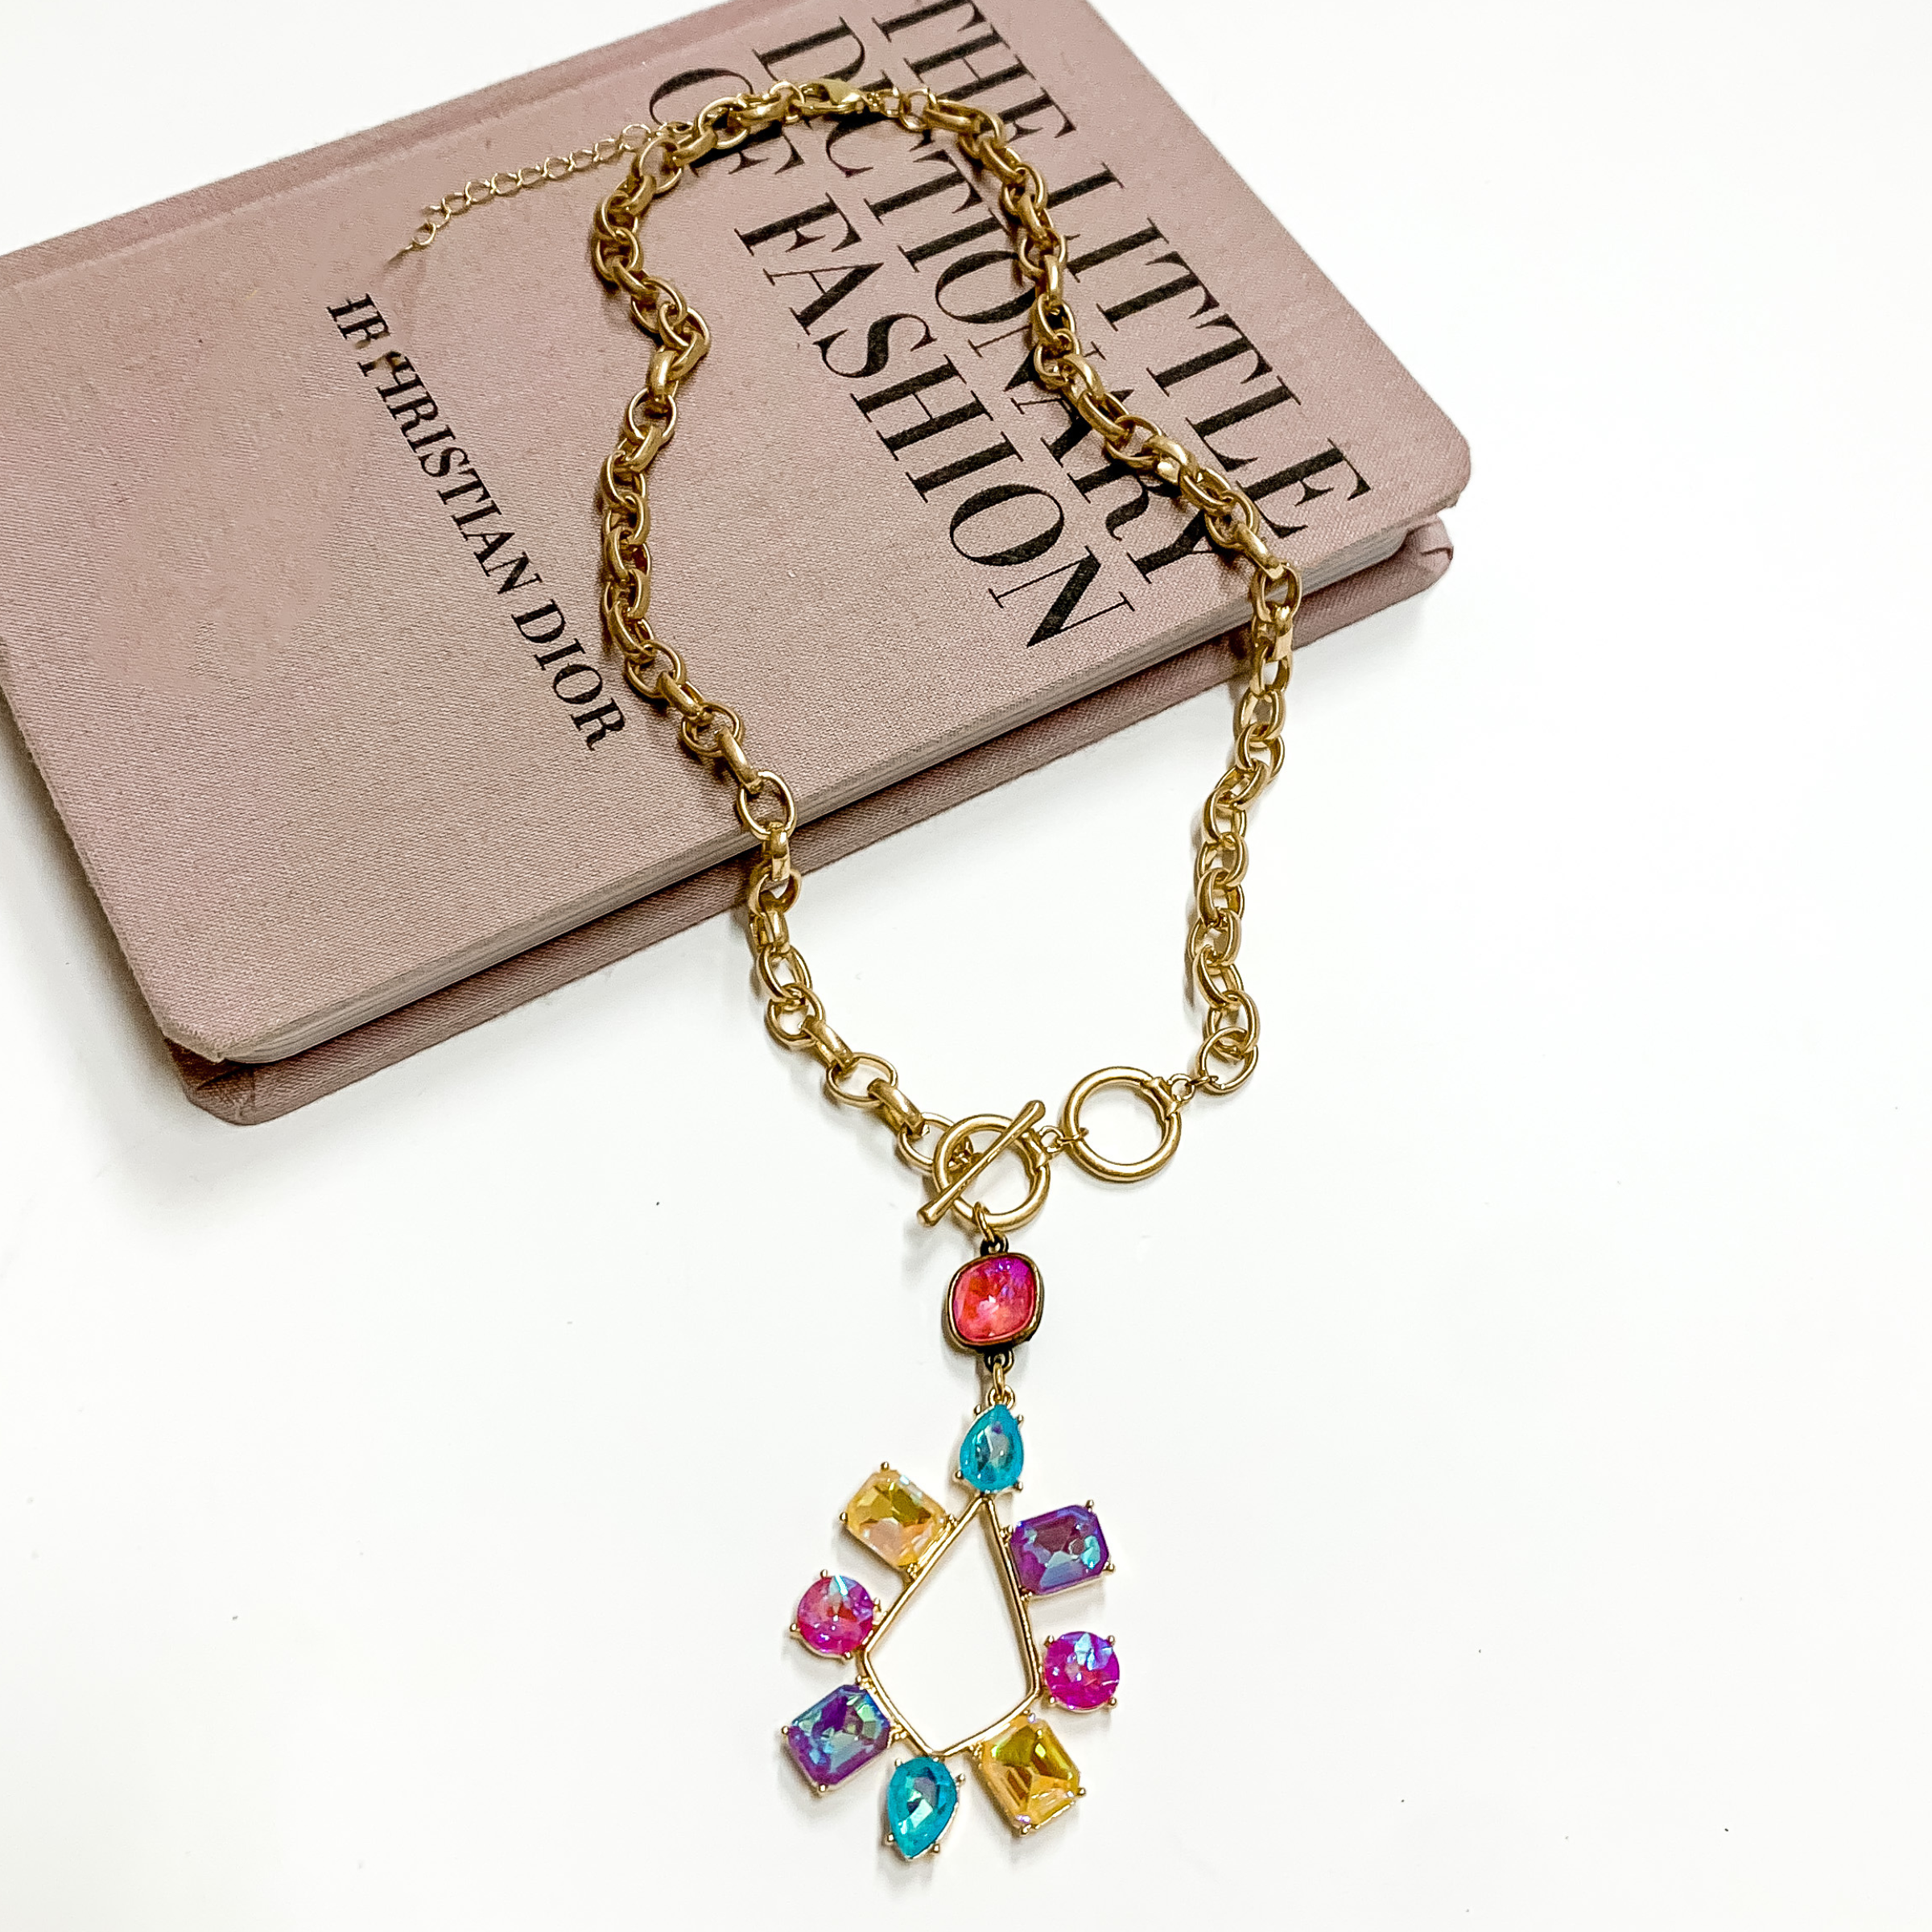 Pink Panache | Gold Tone Chain Necklace with a Pink Lotus Delight Crystal Drop and Multicolor Crystal Teardrop Pendant - Giddy Up Glamour Boutique